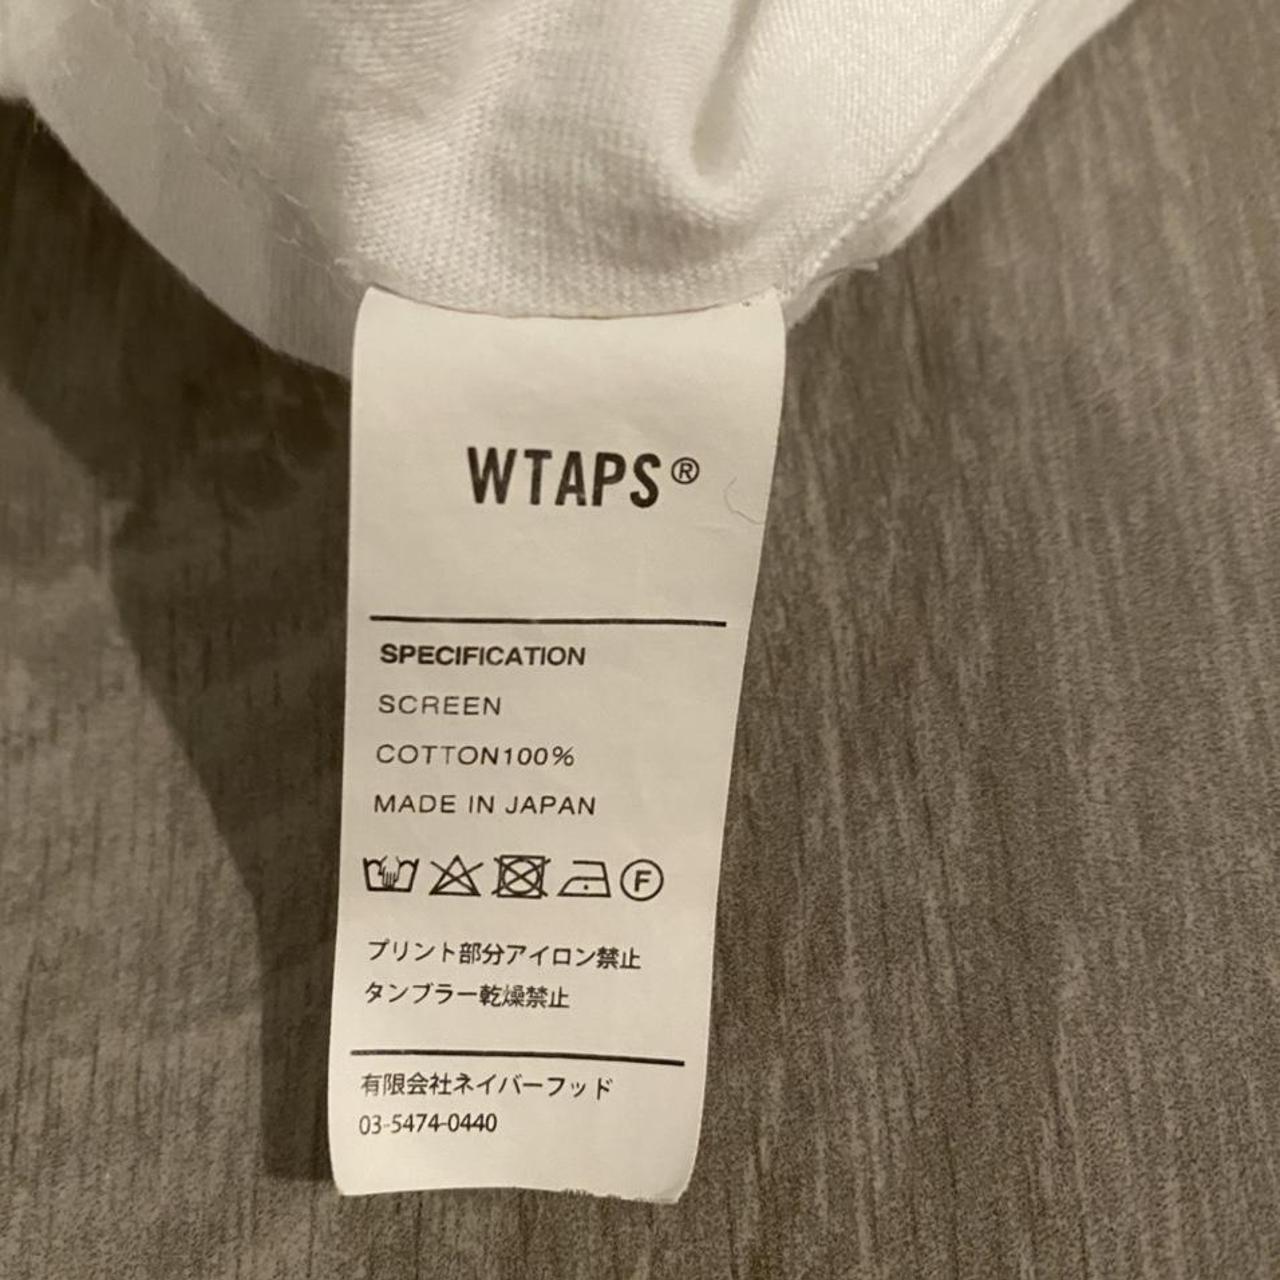 Wtaps white tee with black industrial text size x 03